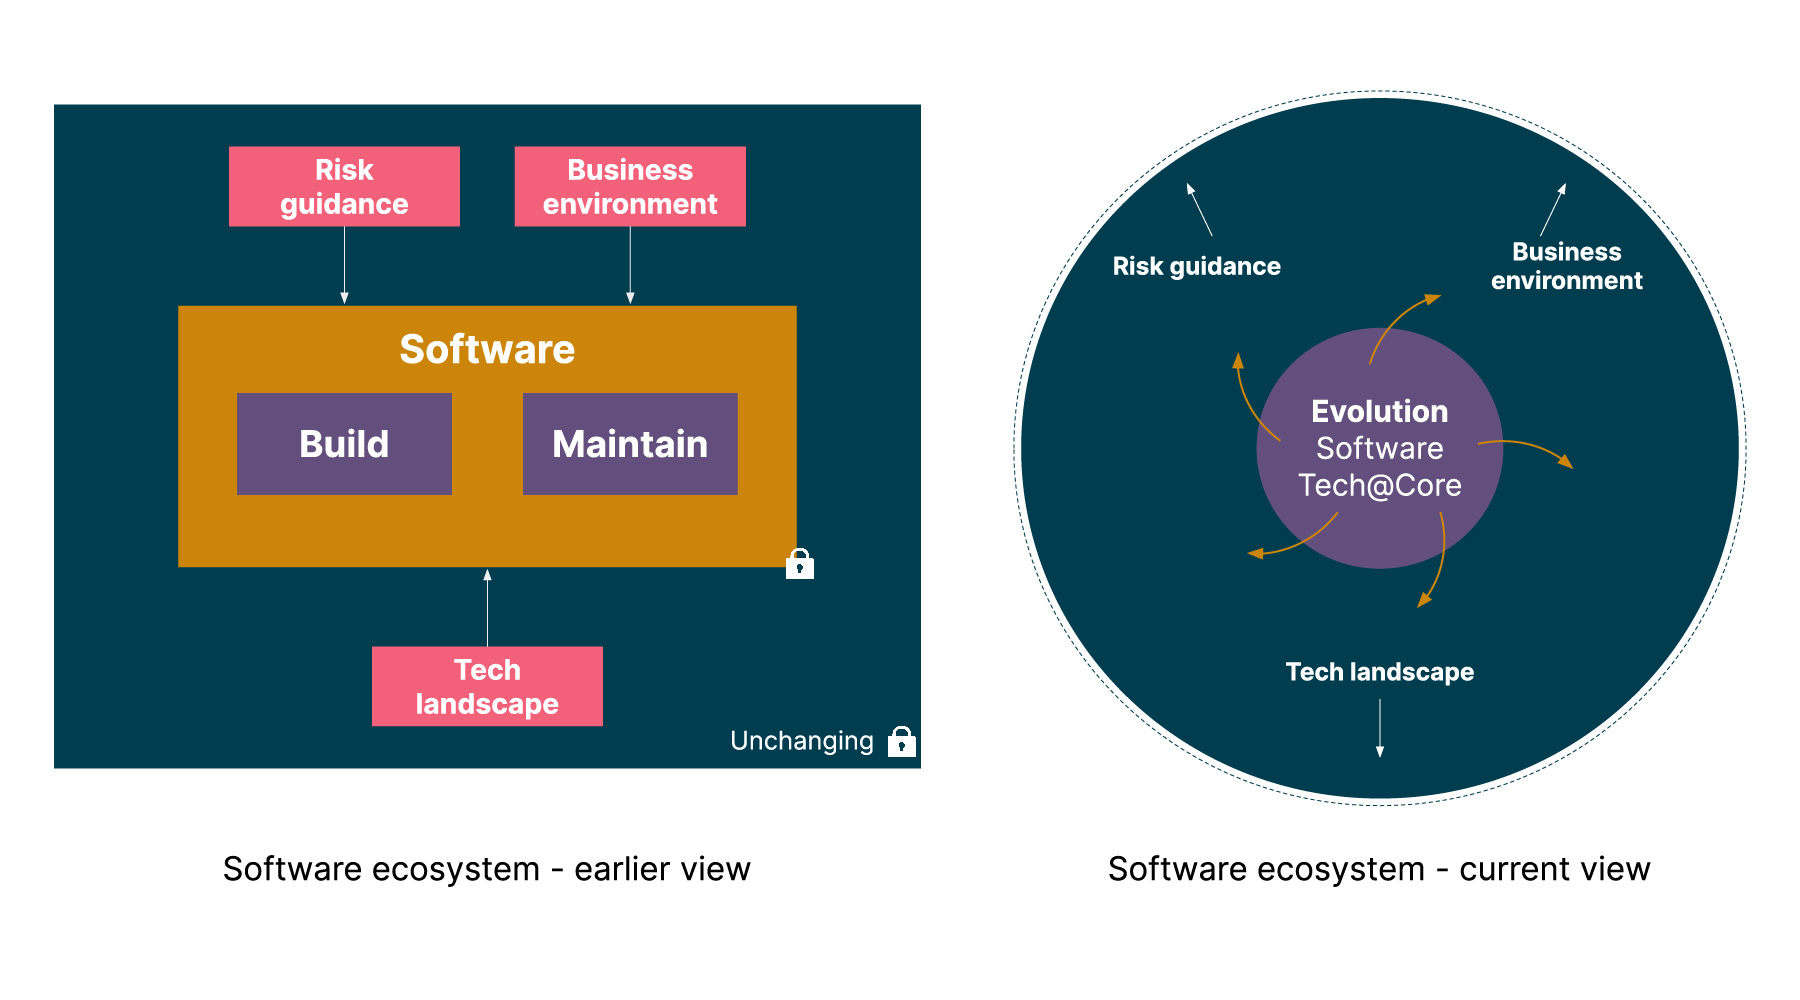 software ecosystem earlier (unchanging) vs current view (continuous change)